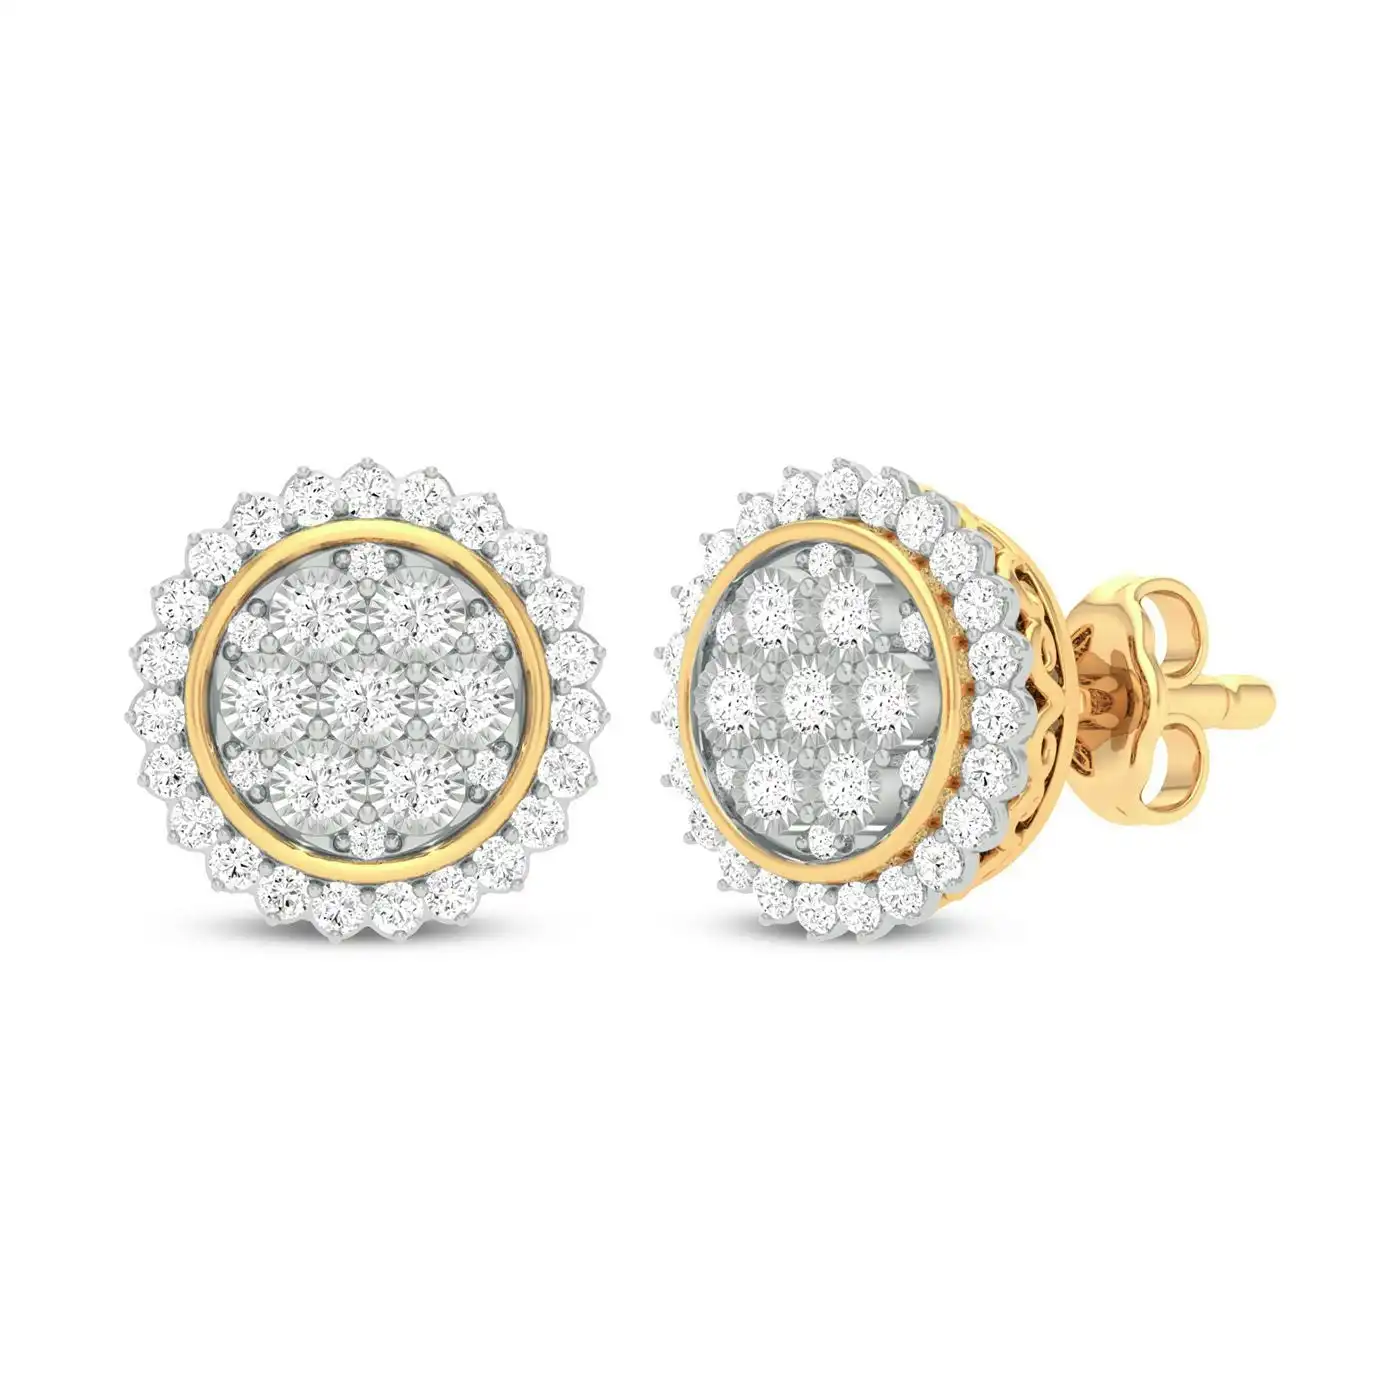 Meera Halo Earrings with 1/2ct of Laboratory Grown Diamonds in 9ct Yellow Gold